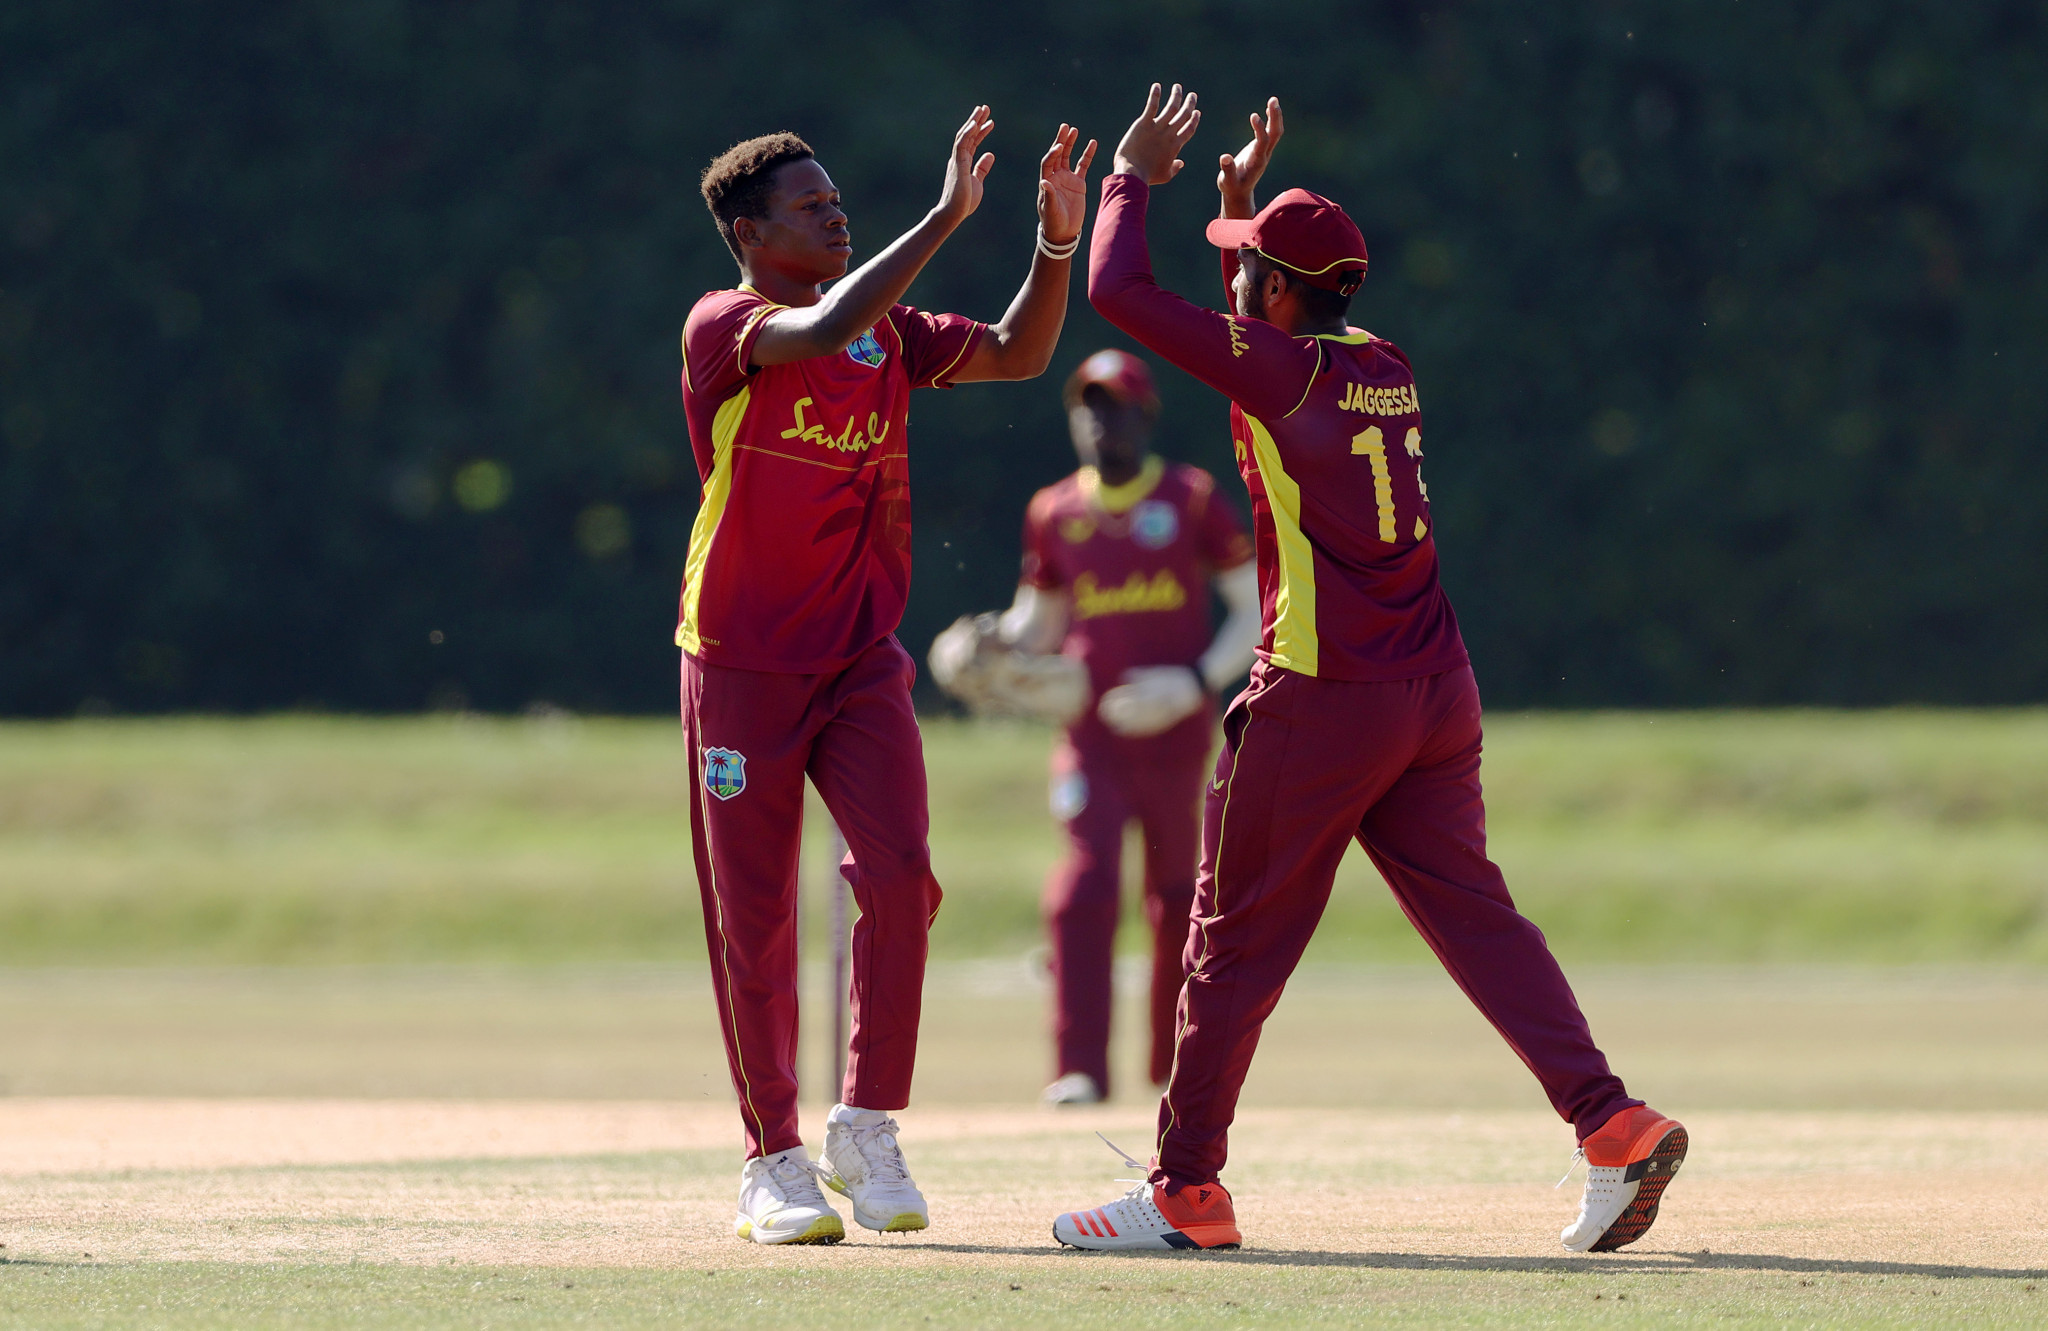 Hosts West Indies fail to reach Super League at ICC Under-19 Cricket World Cup